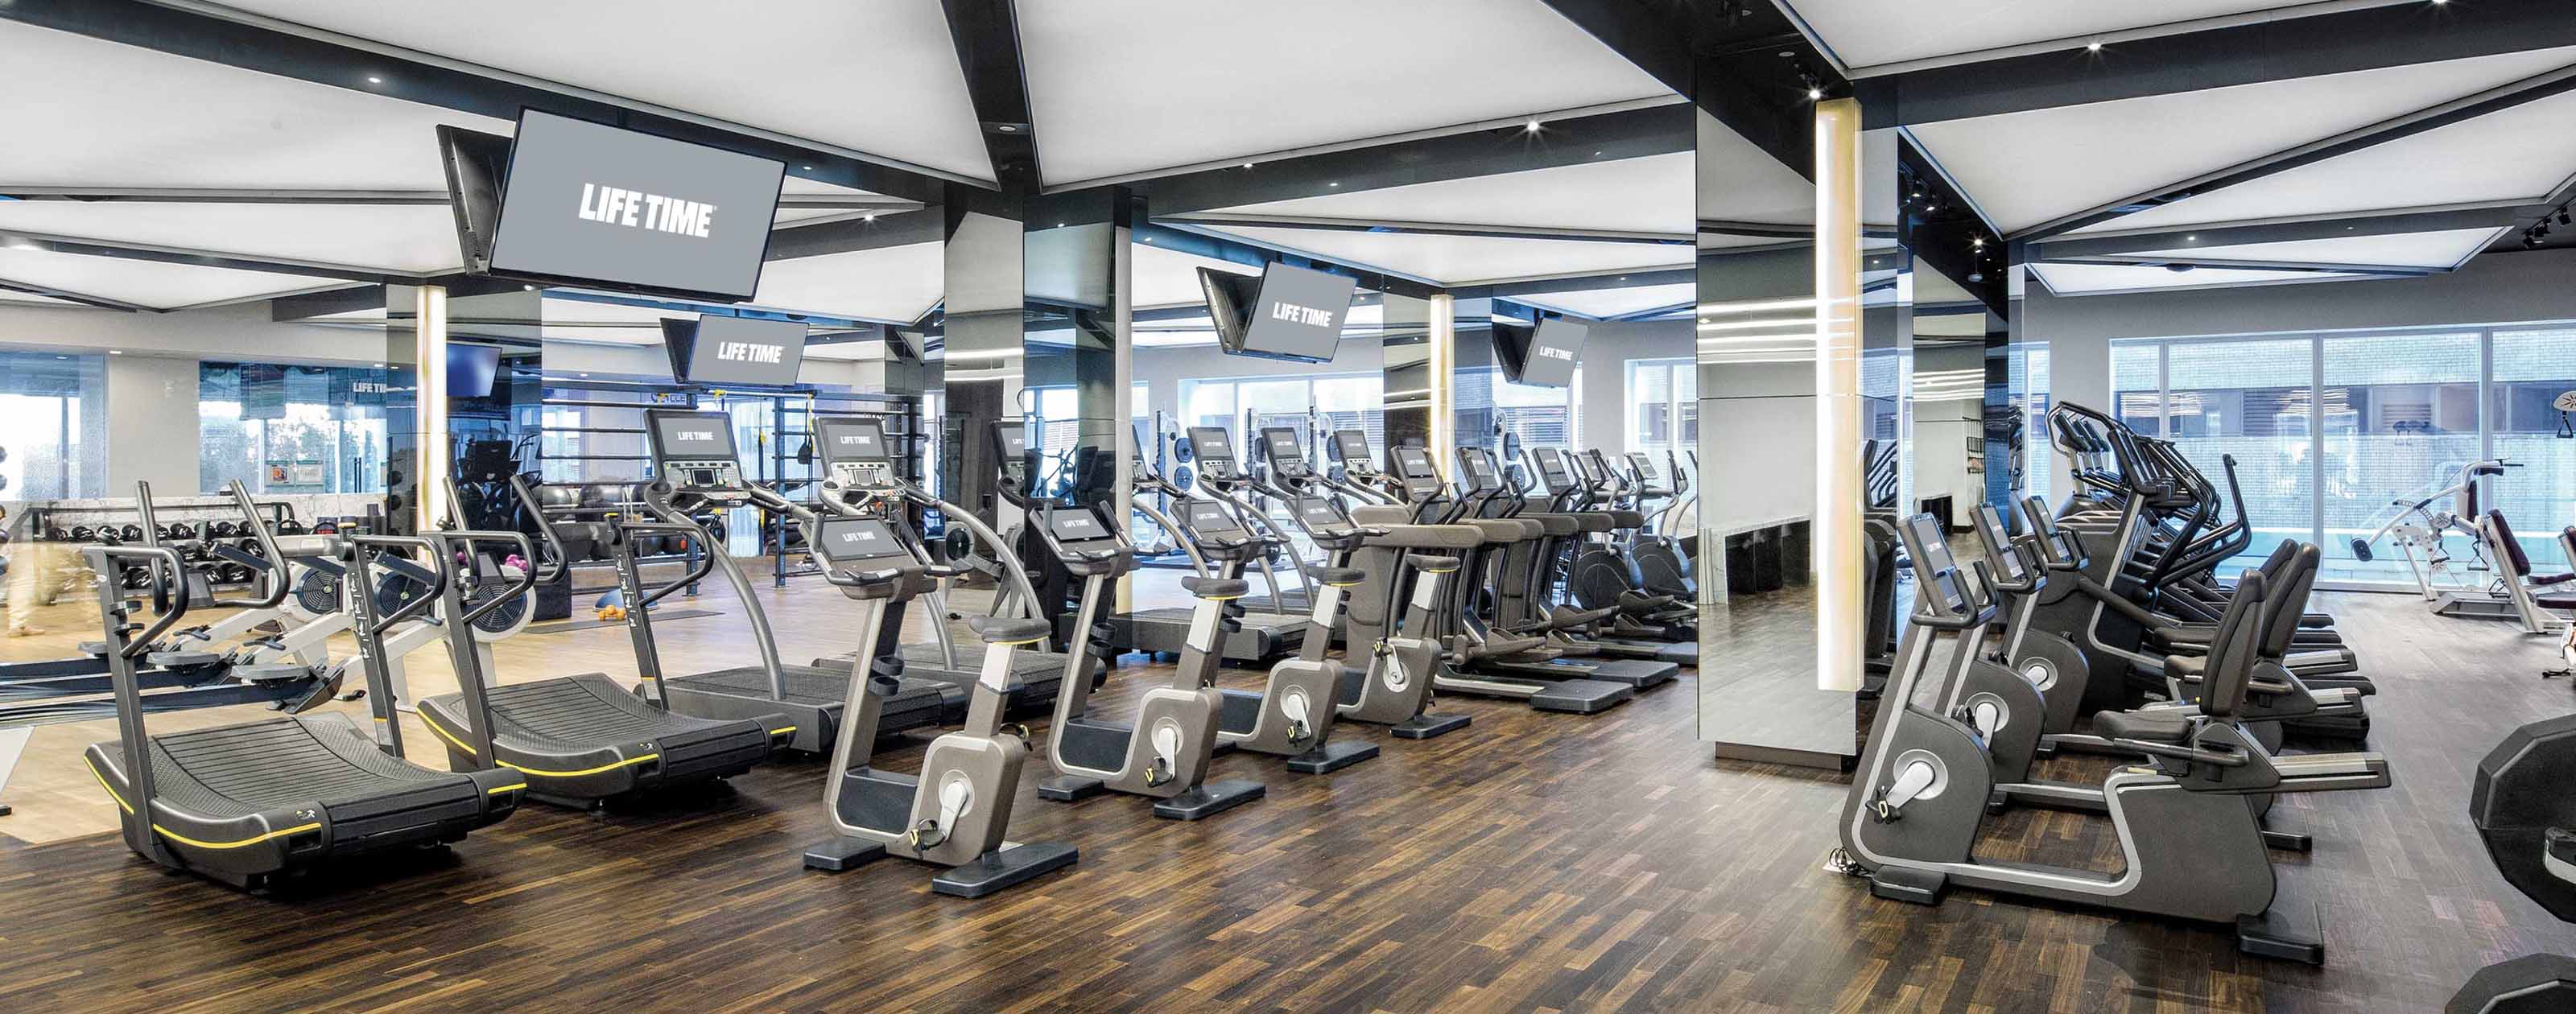 rows of cardio machines and TVs